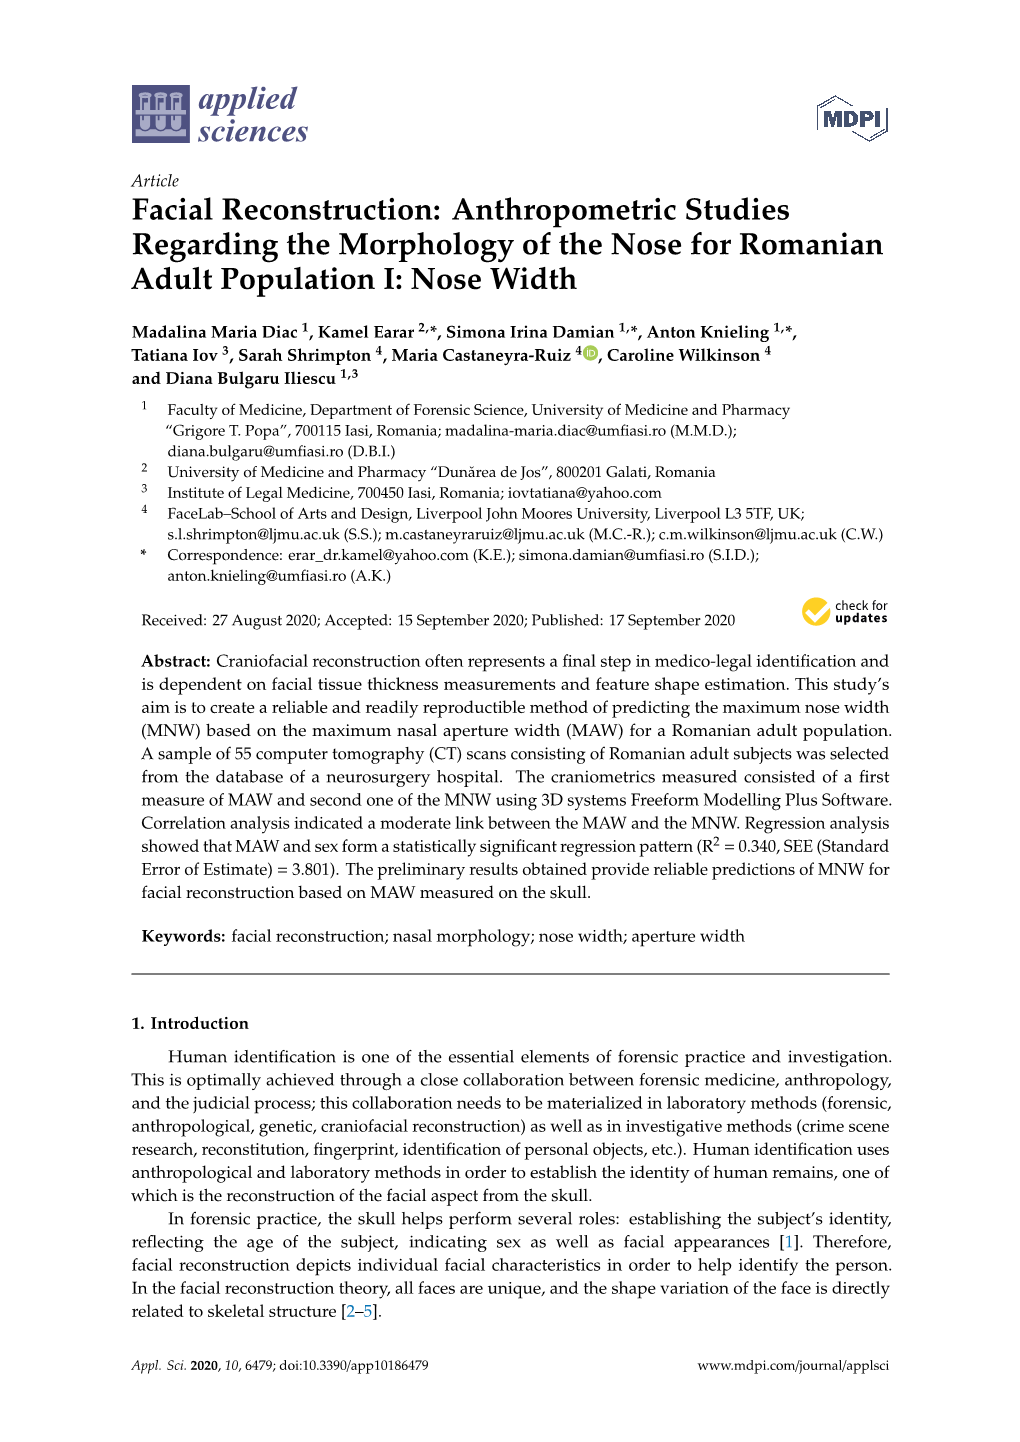 Facial Reconstruction: Anthropometric Studies Regarding the Morphology of the Nose for Romanian Adult Population I: Nose Width